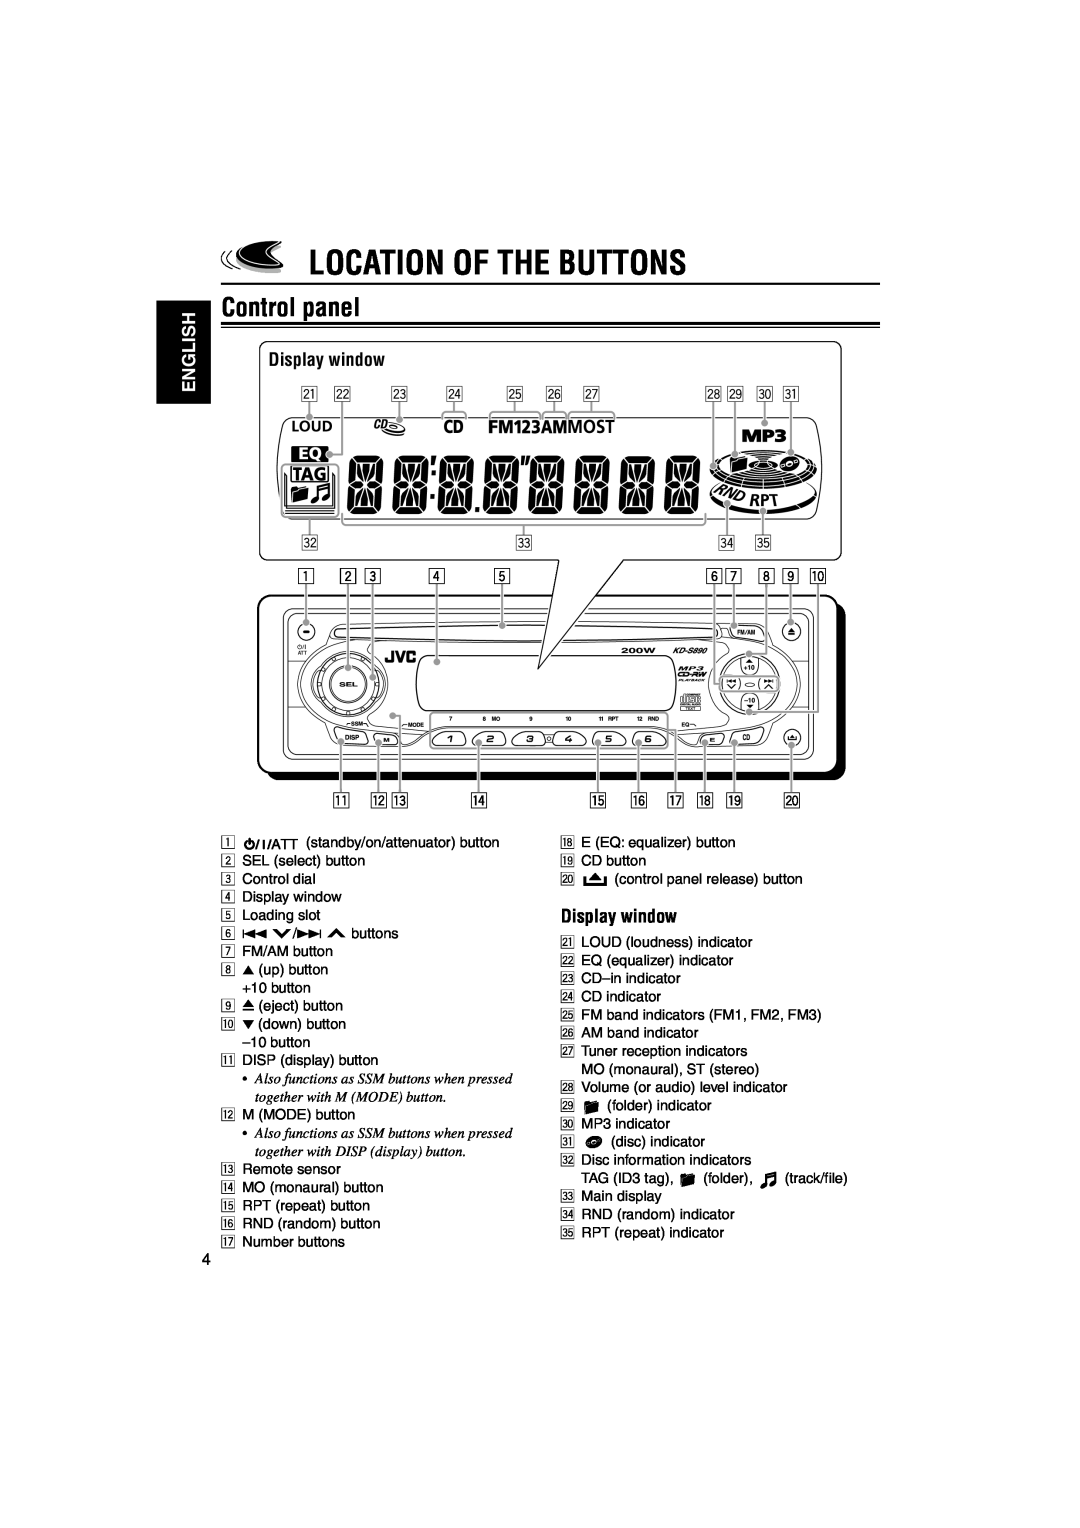 JVC KD-S890 manual Location Of The Buttons, Control panel, Display window, English 